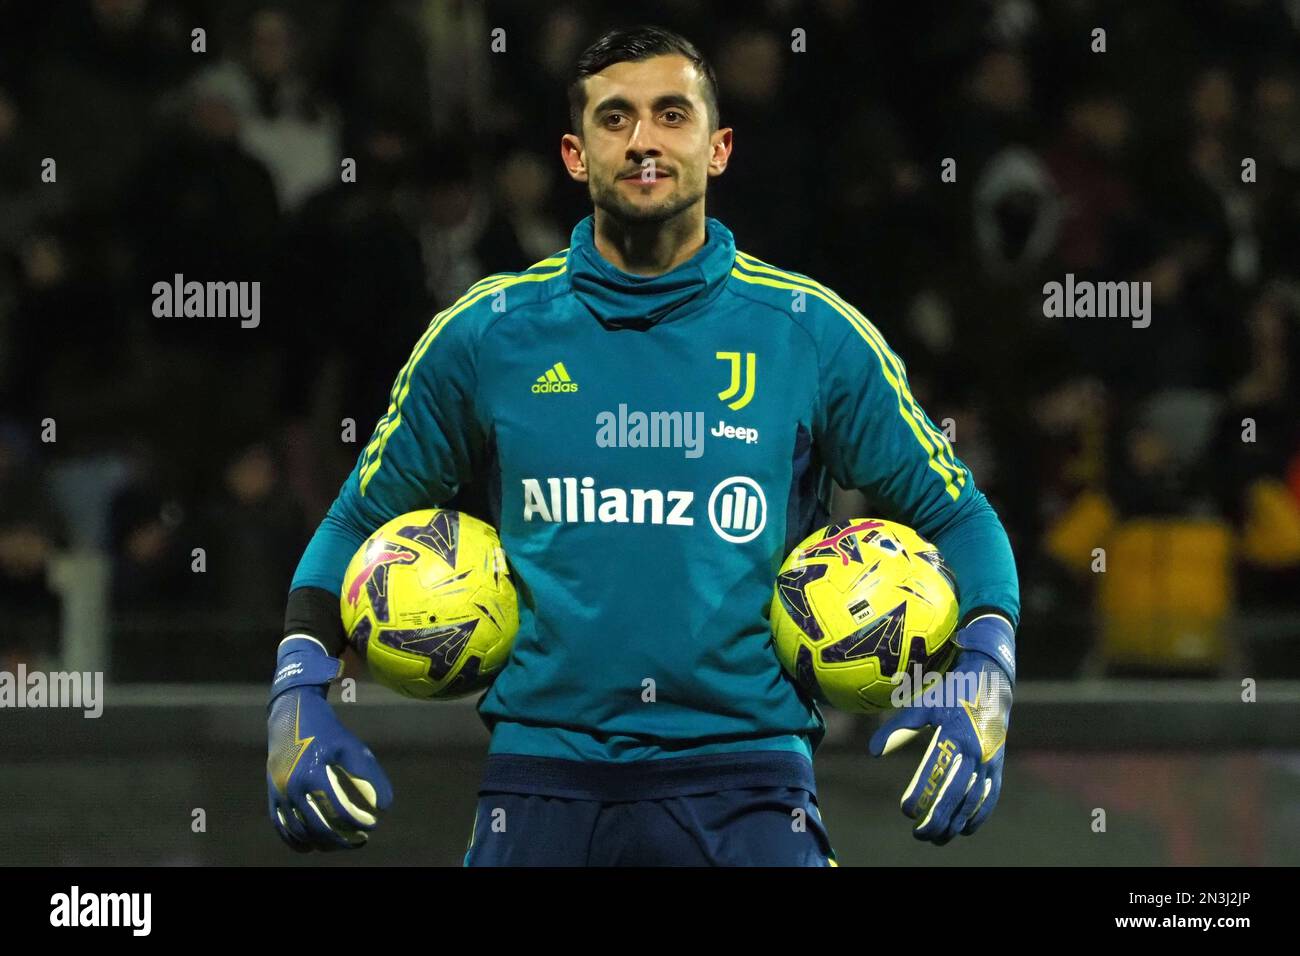 Mattia Perin player of Juventus, during the match of the Italian Serie A  league between Salernitana vs Juventus final result, Salernitana 0,  Juventus 3, match played at the Arechi stadium. Napoli, Italy,